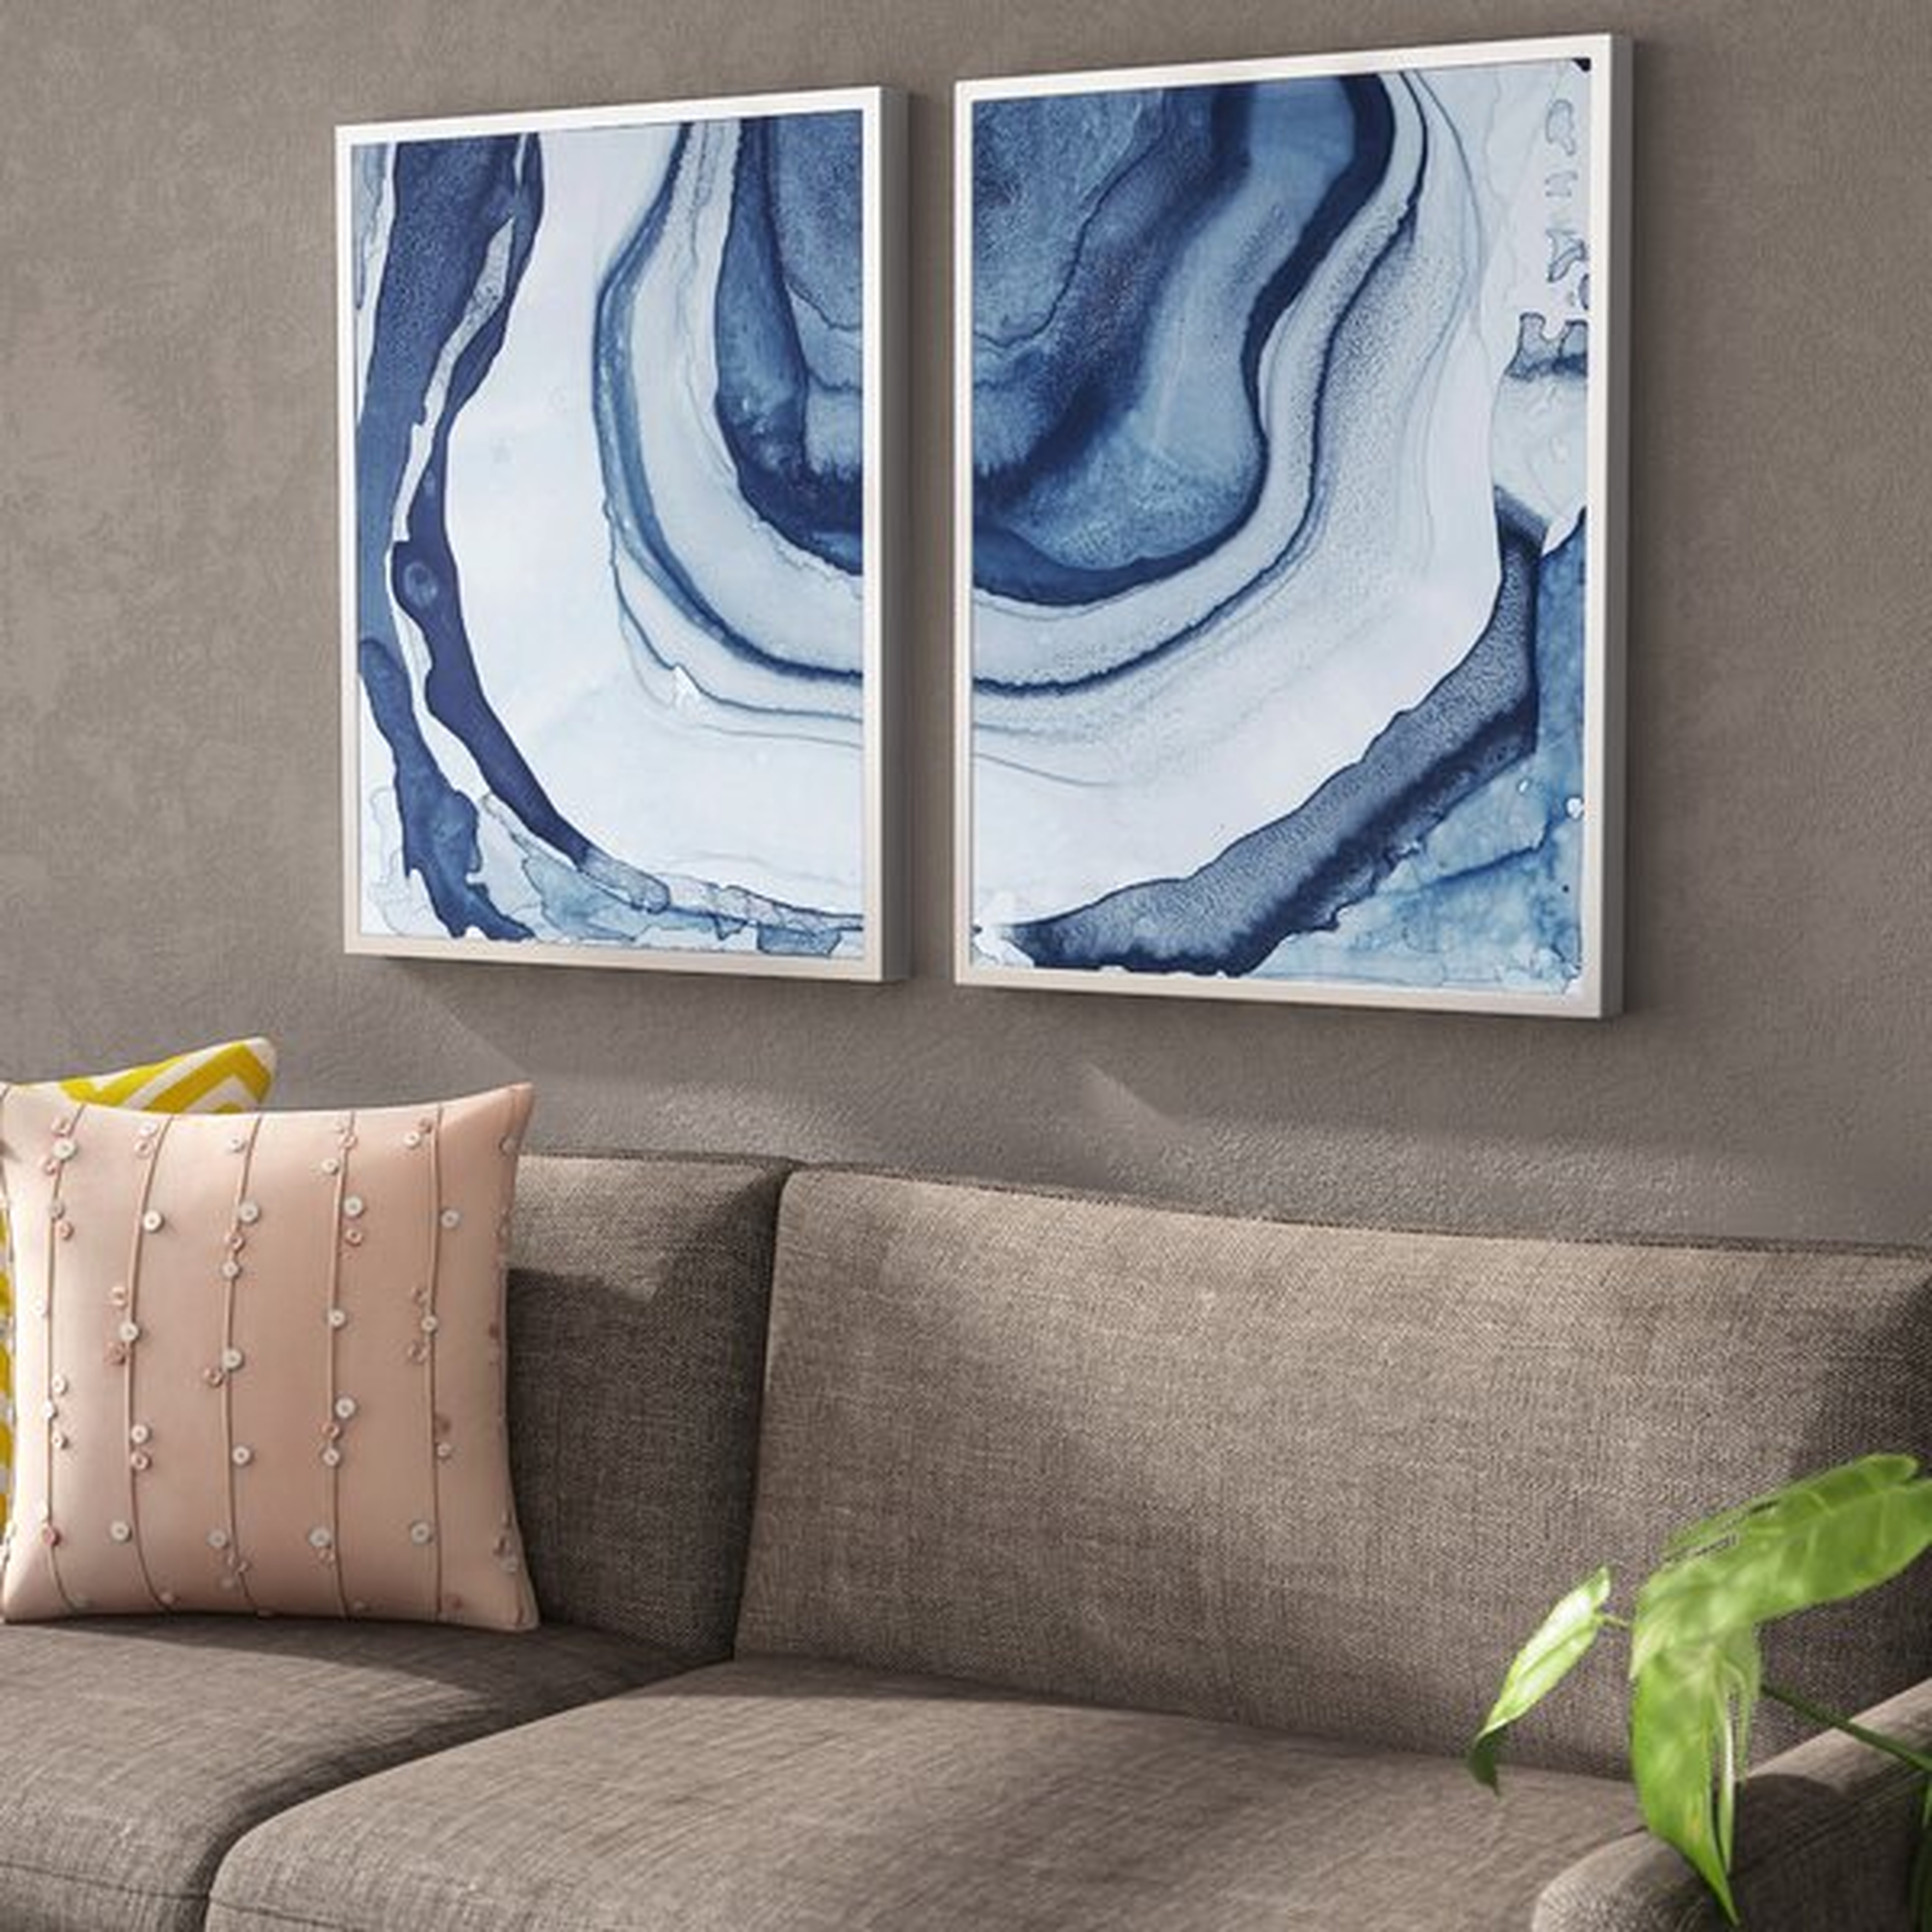 Ethereal - 2 Piece Picture Frame Graphic Art Print Set on Canvas - Wayfair